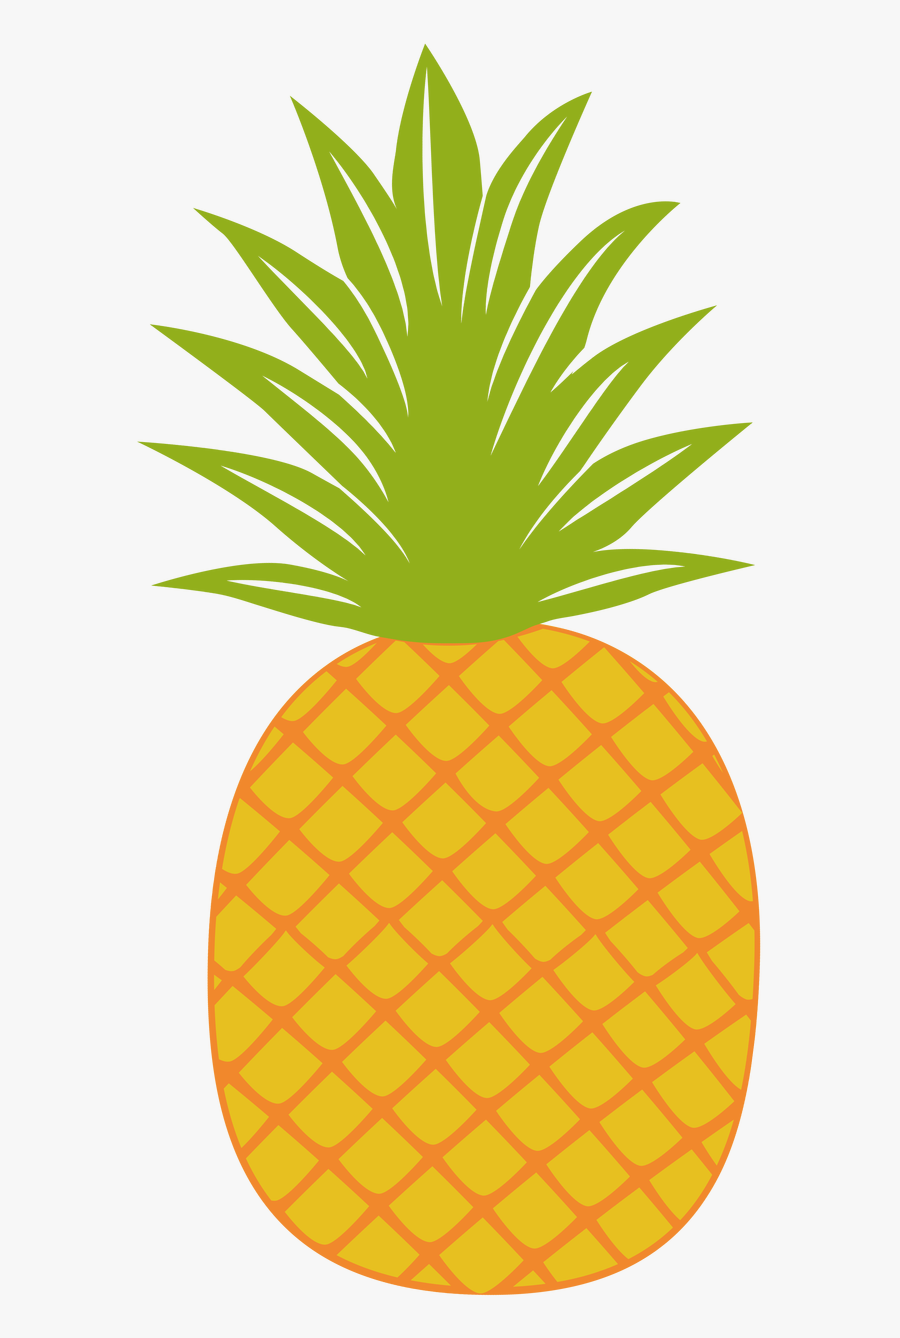 Download Pineapple Clipart Fancy Cut File Pineapple Svg Free Transparent Clipart Clipartkey